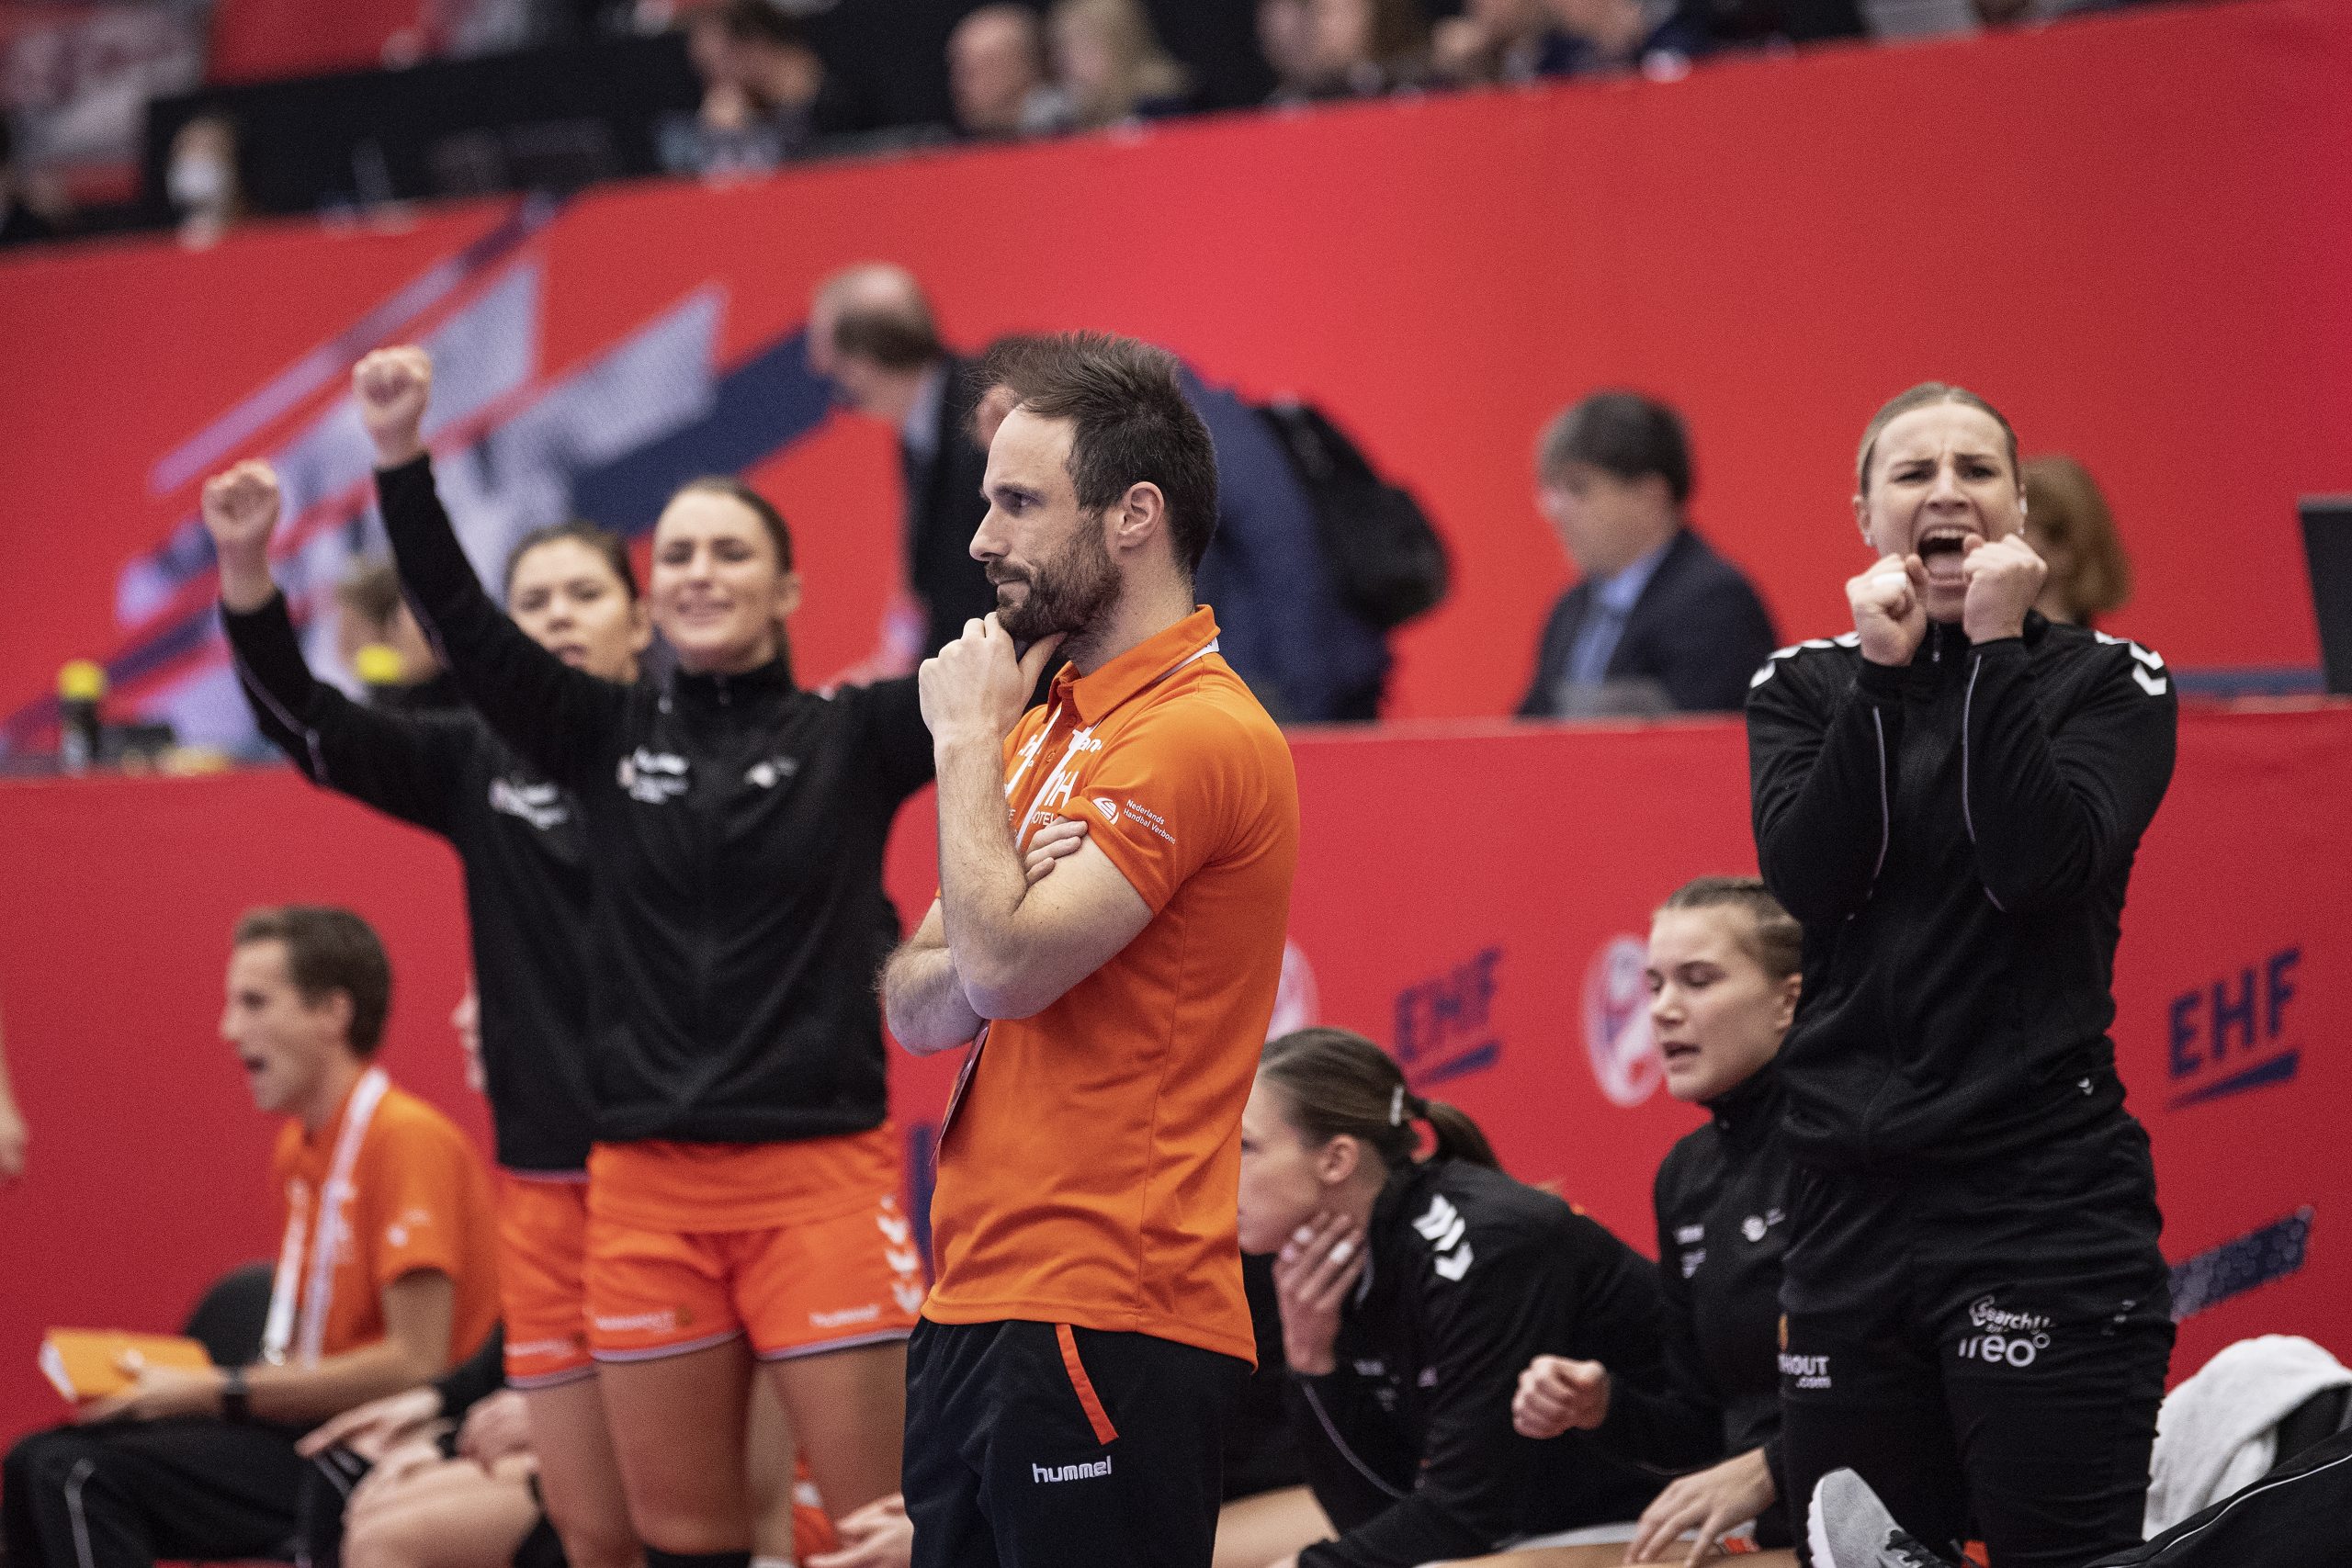 epa08884212 Head coach Emmanuel Mayonnade of the Netherlands reacts during the EHF EURO 2020 European Women's Handball Main Round - Group II match between the Netherlands and Germany at Sydbank Arena in Kolding, Denmark, 14 December 2020.  EPA/BO AMSTRUP DENMARK OUT